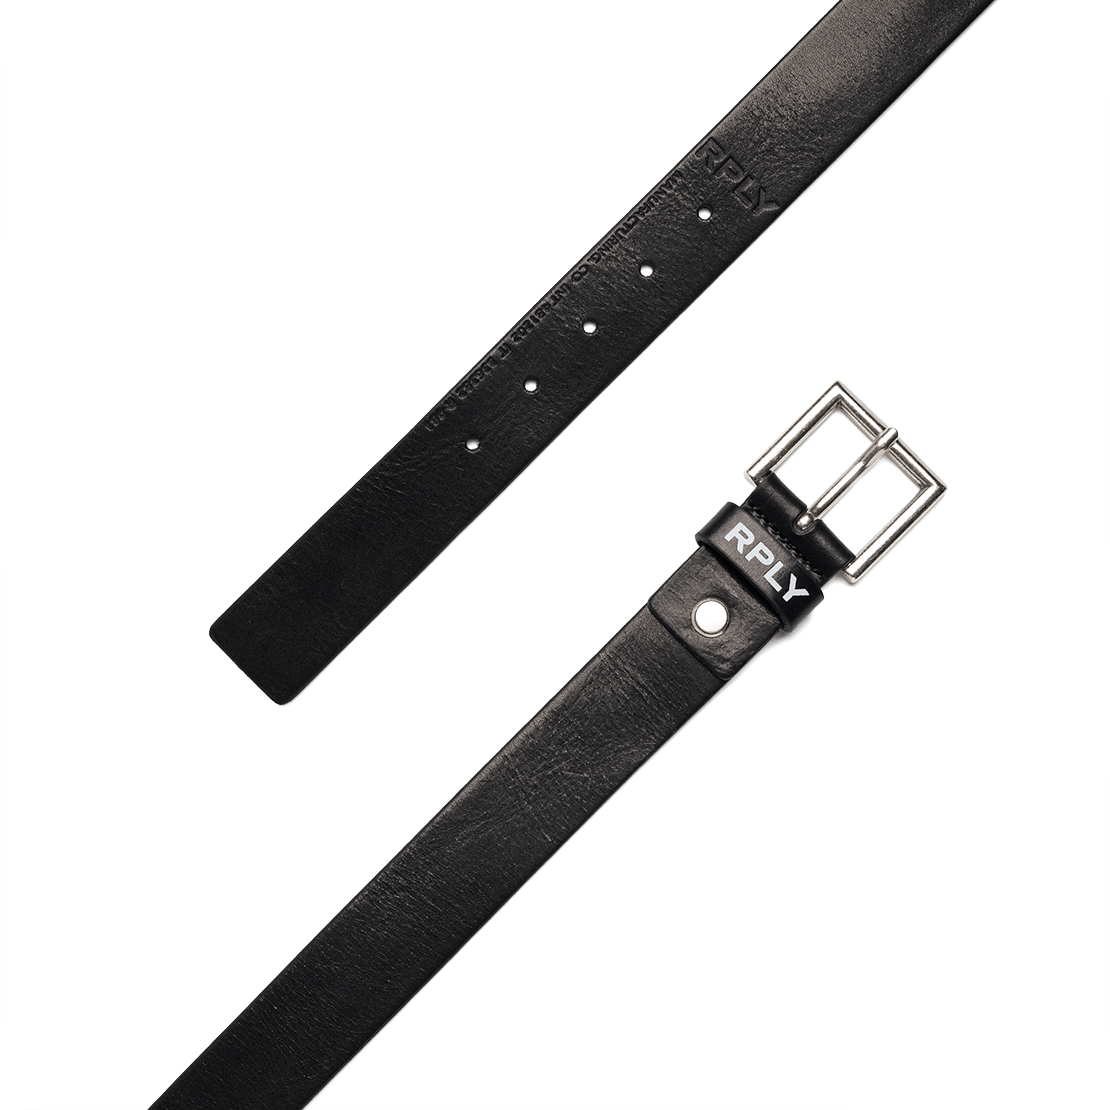 Replay Hammered Leather Belt